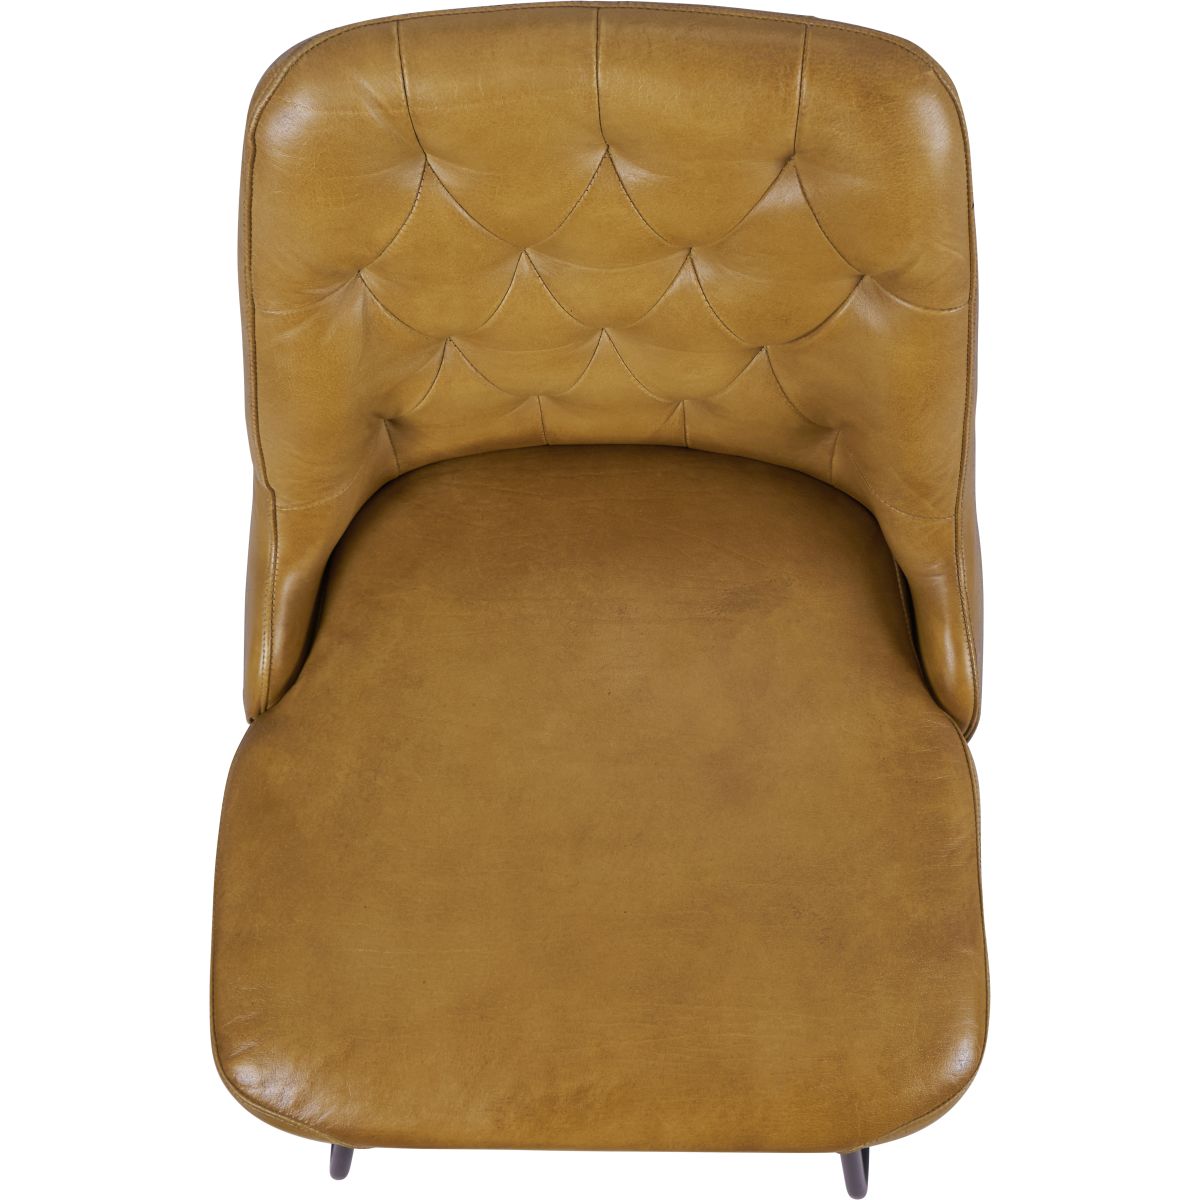 Camillo Mustard Leather and Iron Dining Chair